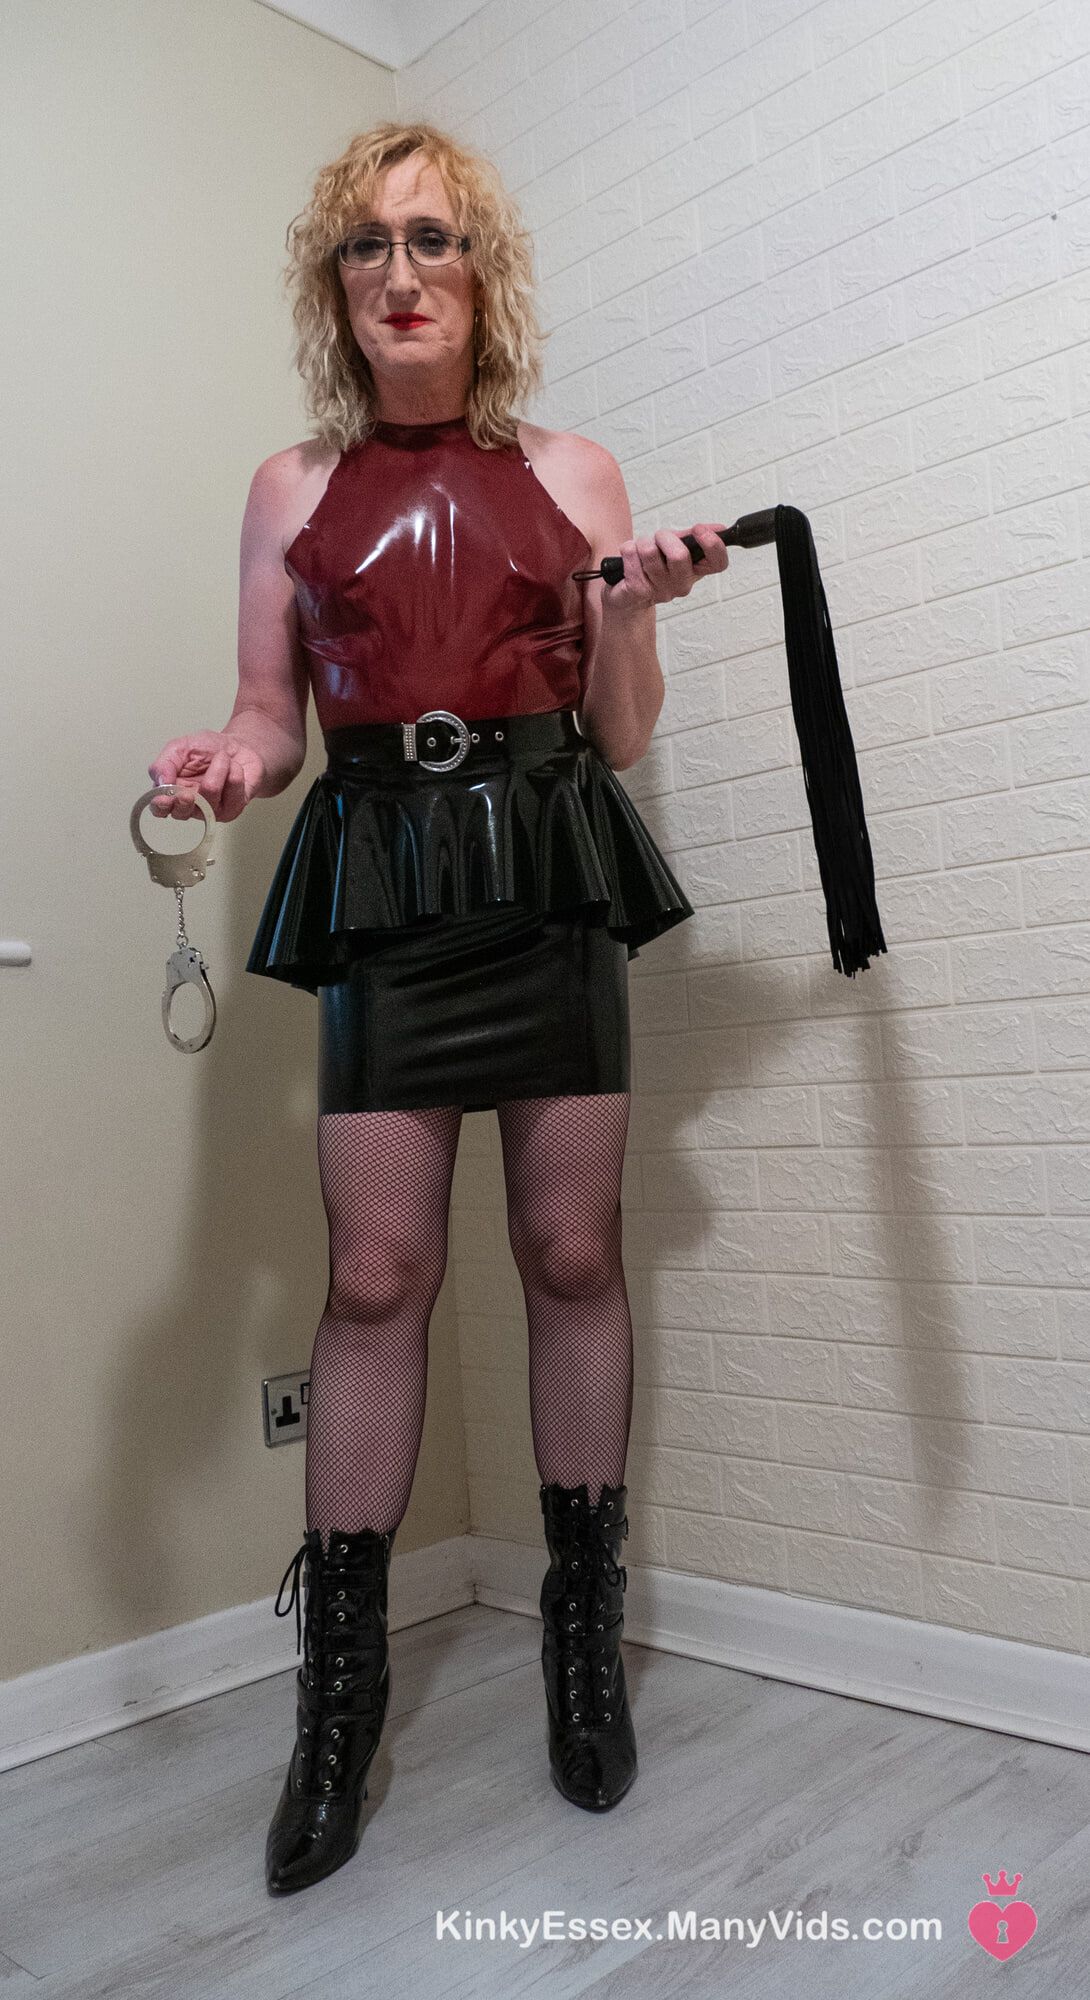 Colour Latex Dress, Boots and Fishnets on British Milf #21